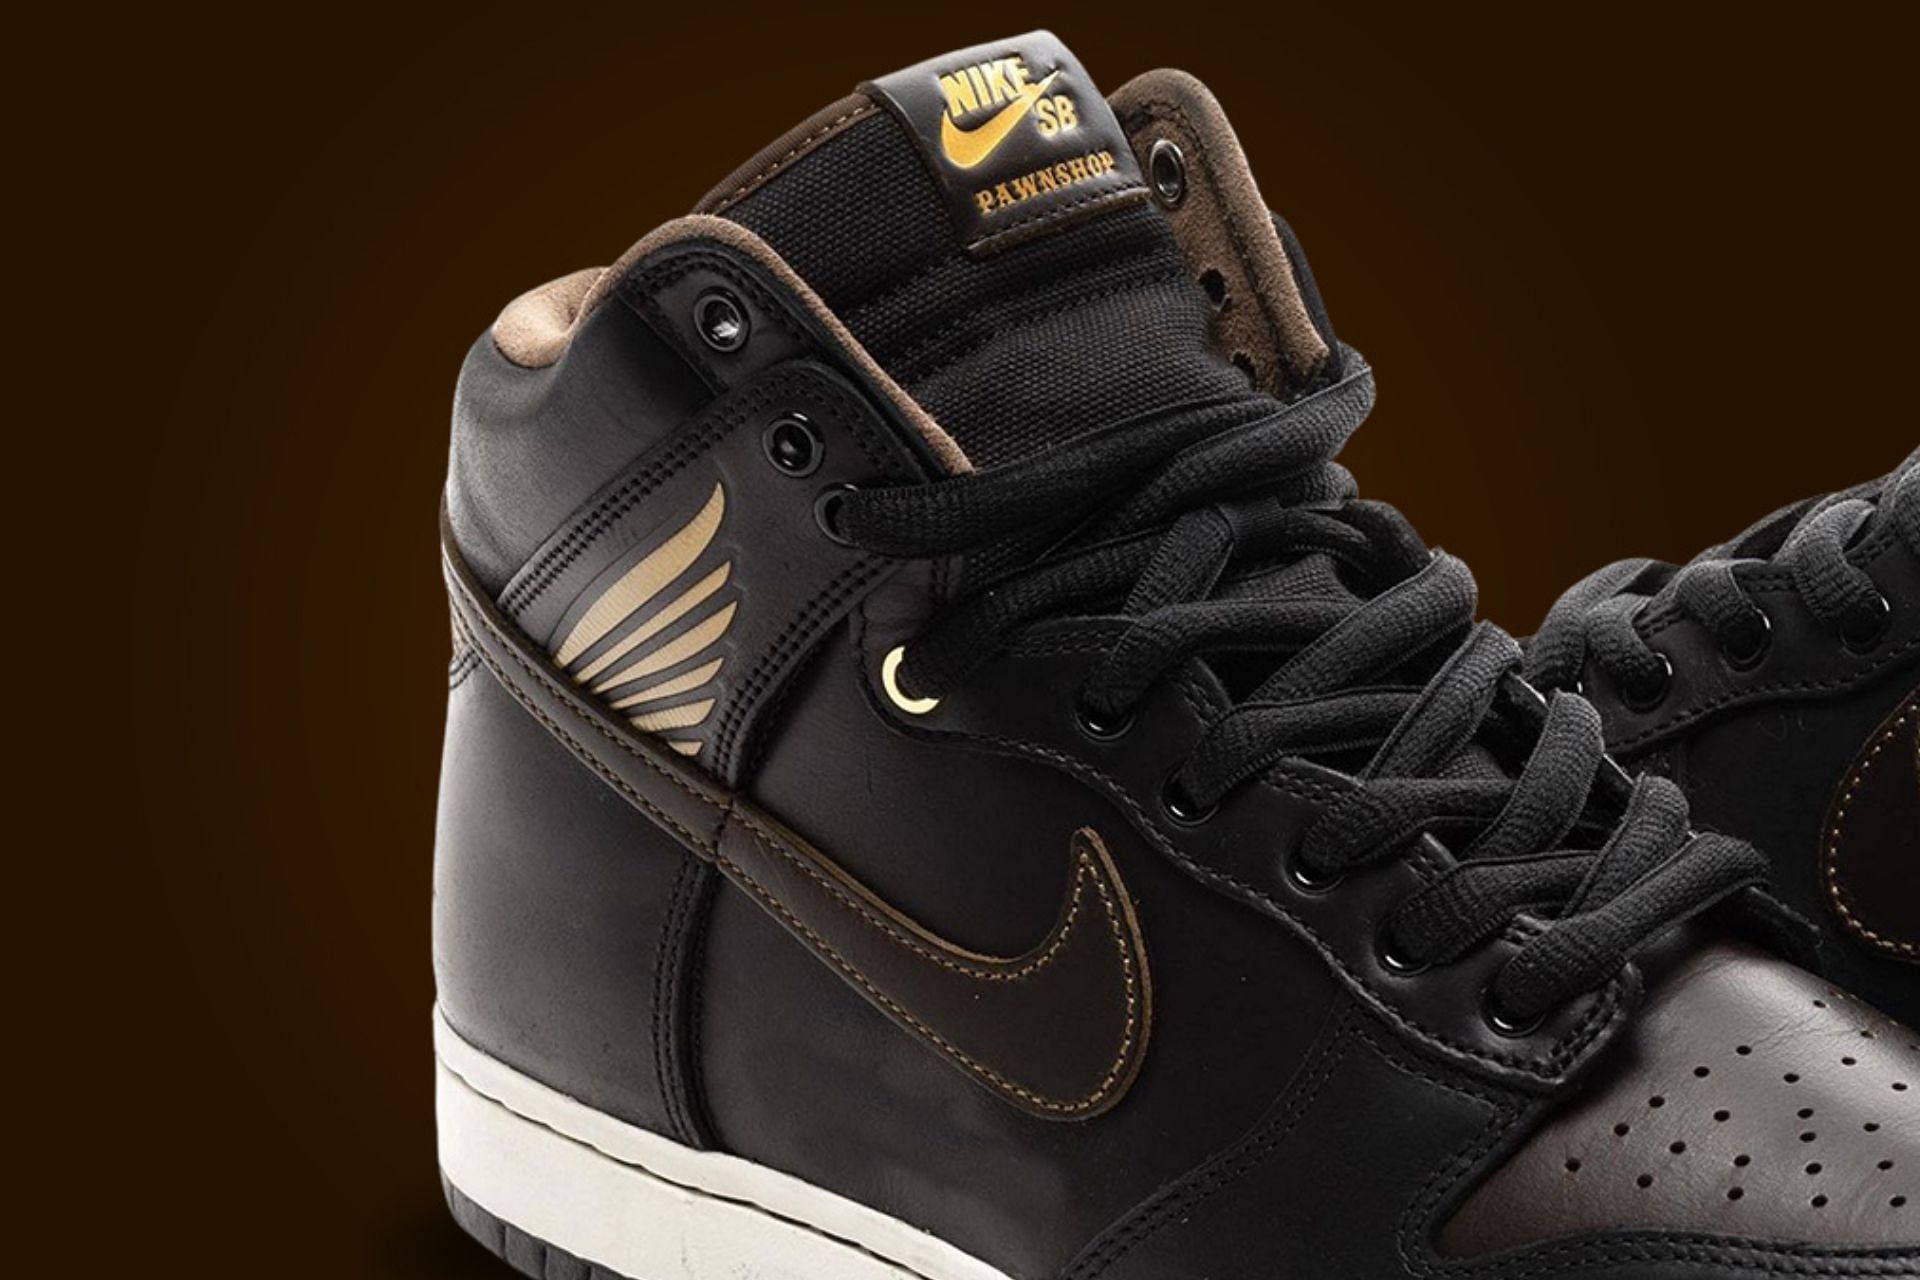 Where nike sb dunk limited edition to buy Pawnshop Skate x Nike SB Dunk High shoes? Price and